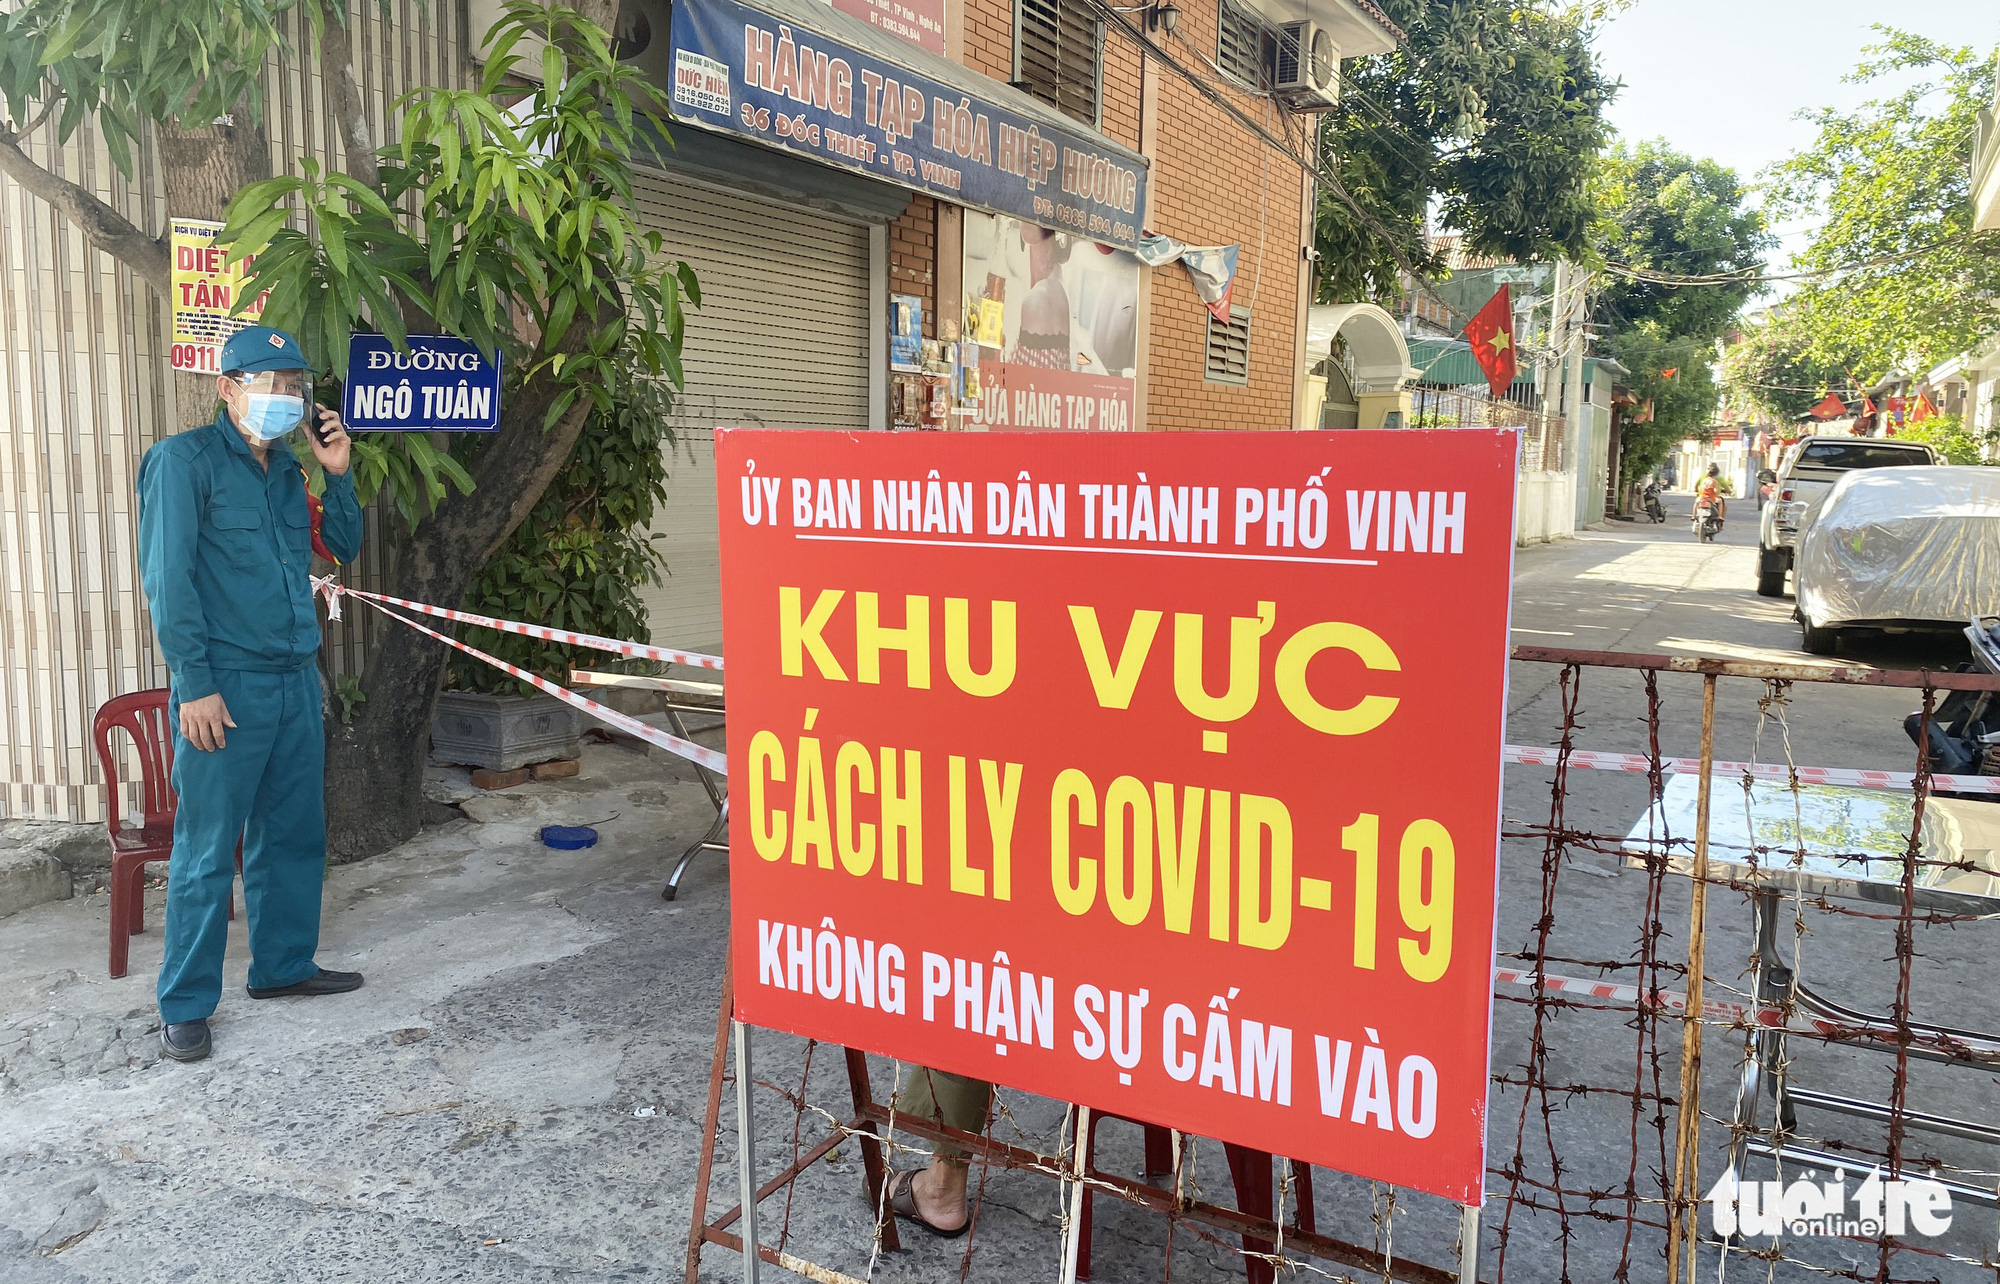 North-central Vietnamese province records four new COVID-19 cases